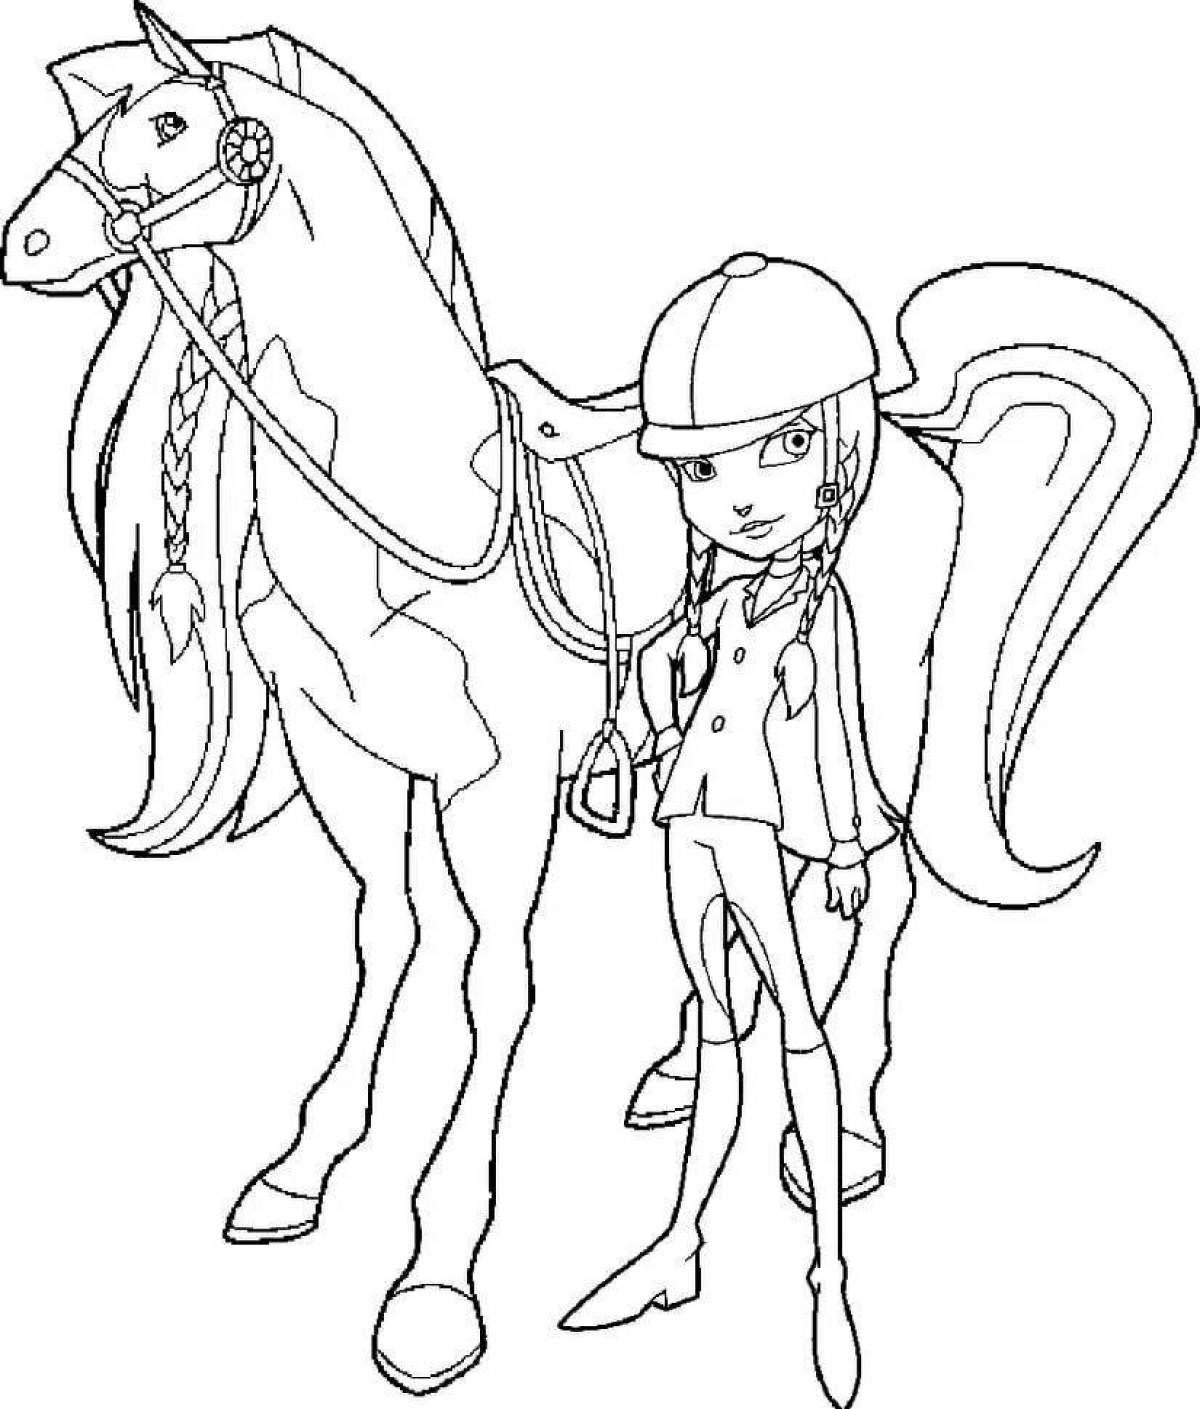 Coloring page luminous country of horses